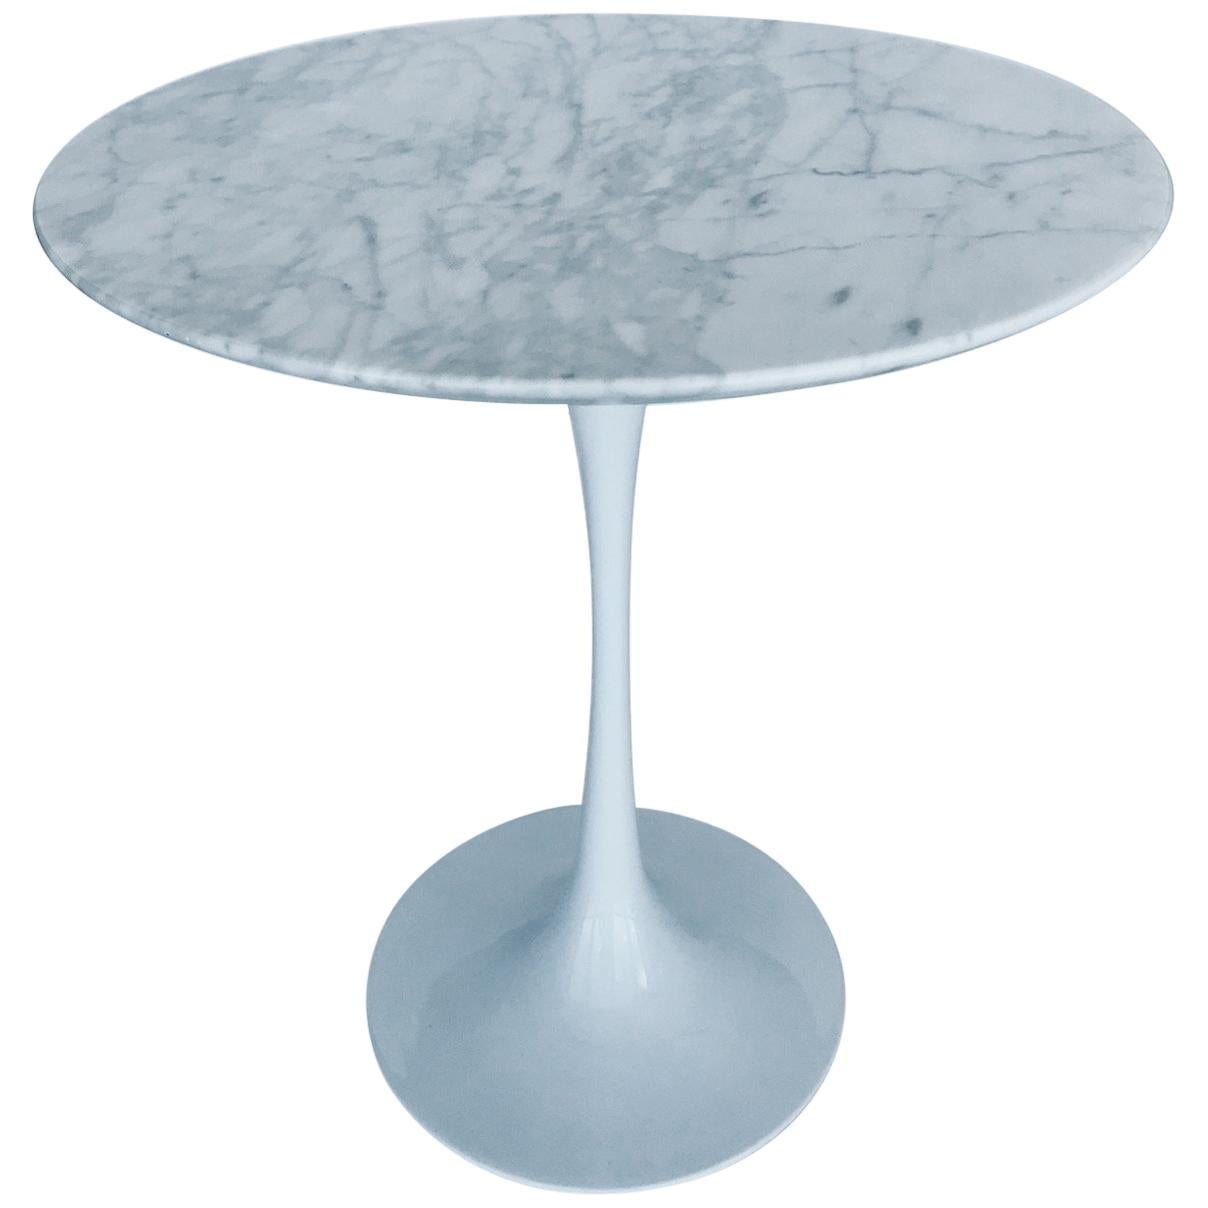 Iconic Mid-Century Modern Tulip Side Table in Carrara Marble